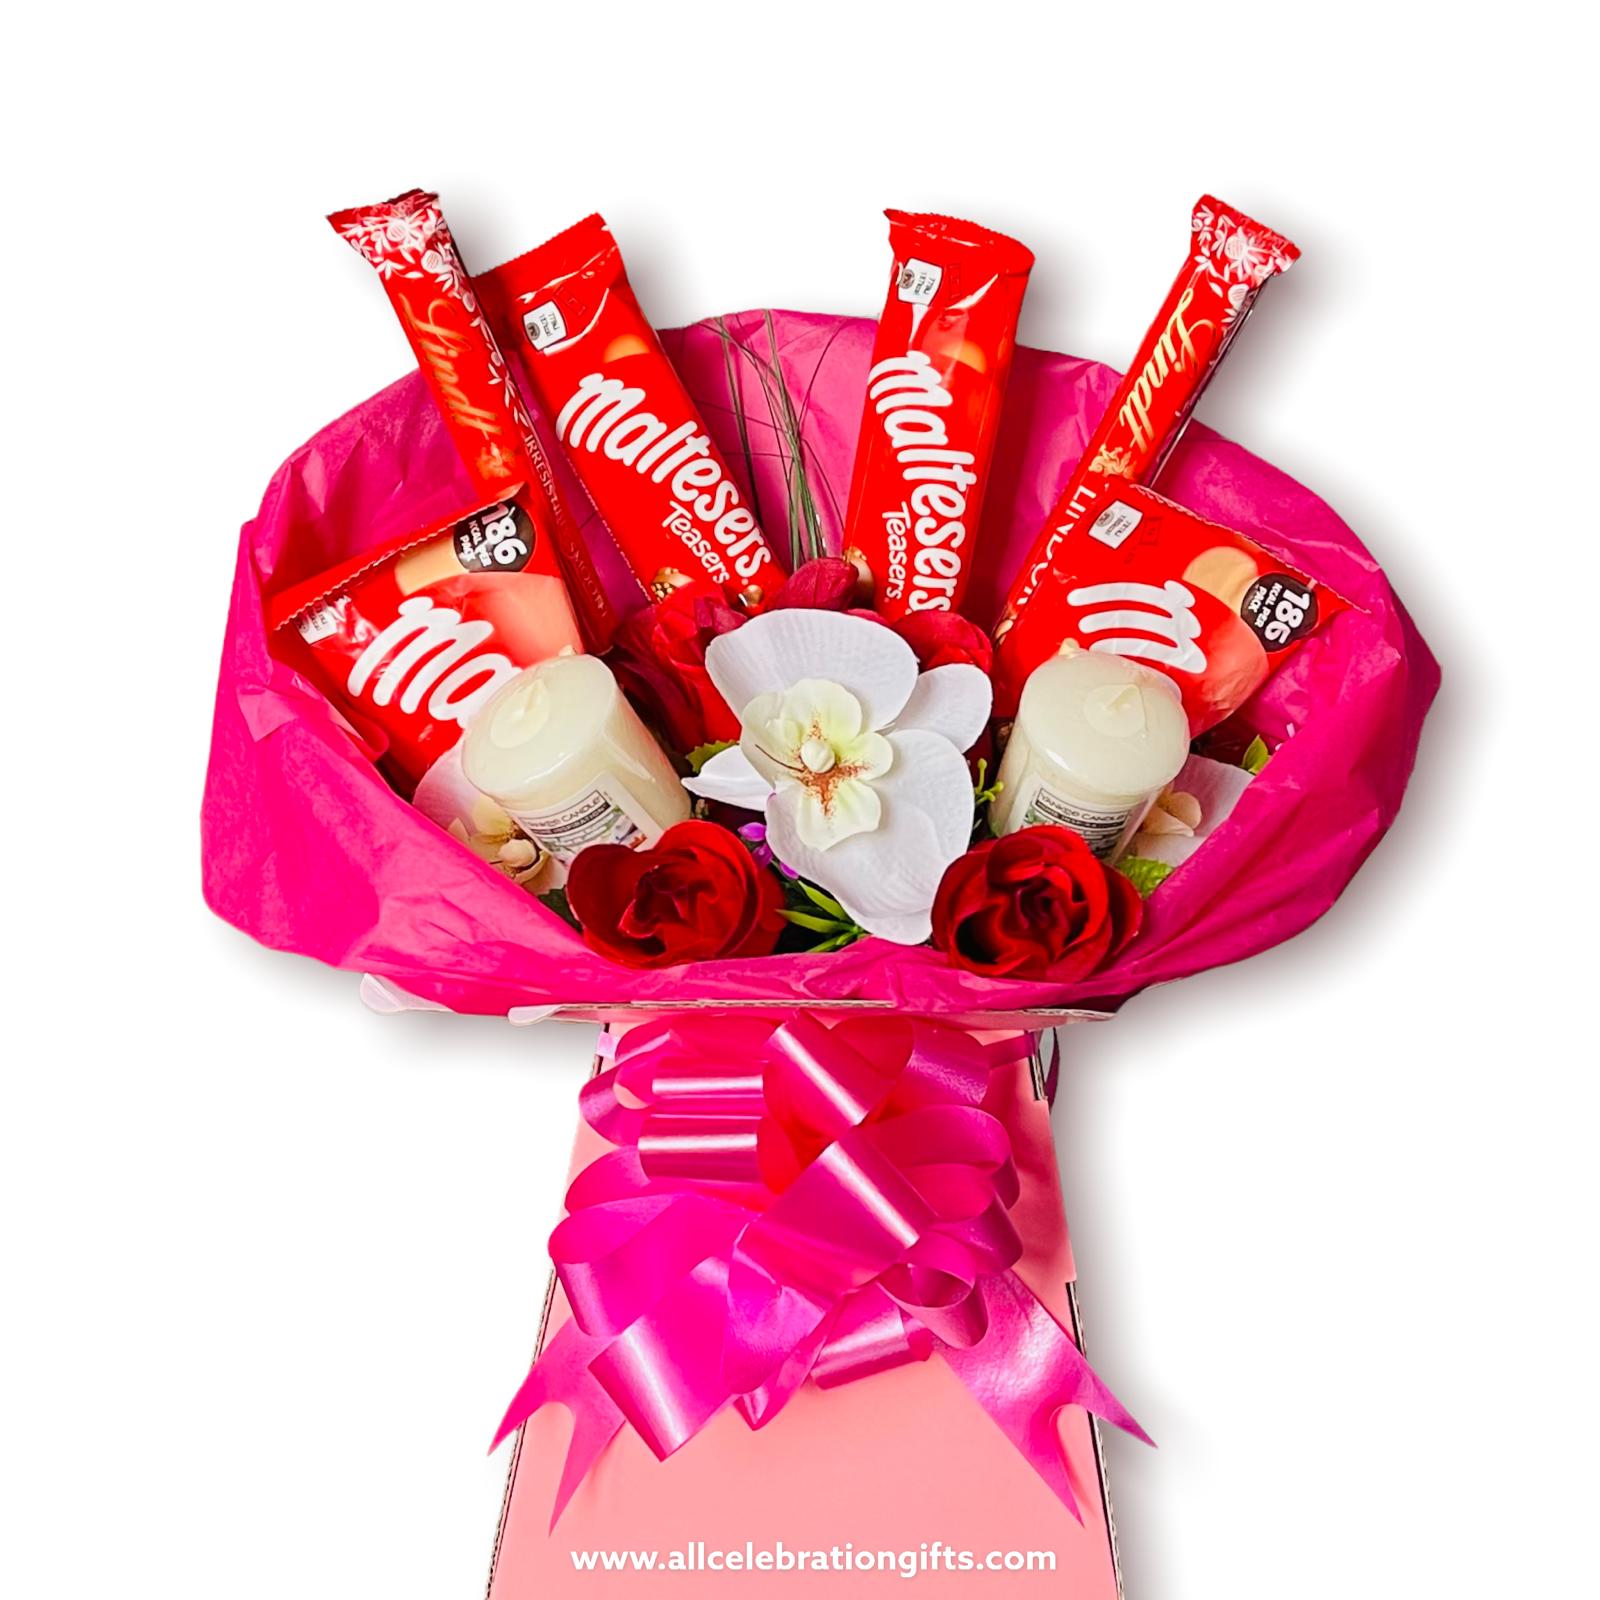 Lindt/Maltesers Chocolate & Candle Bouquet